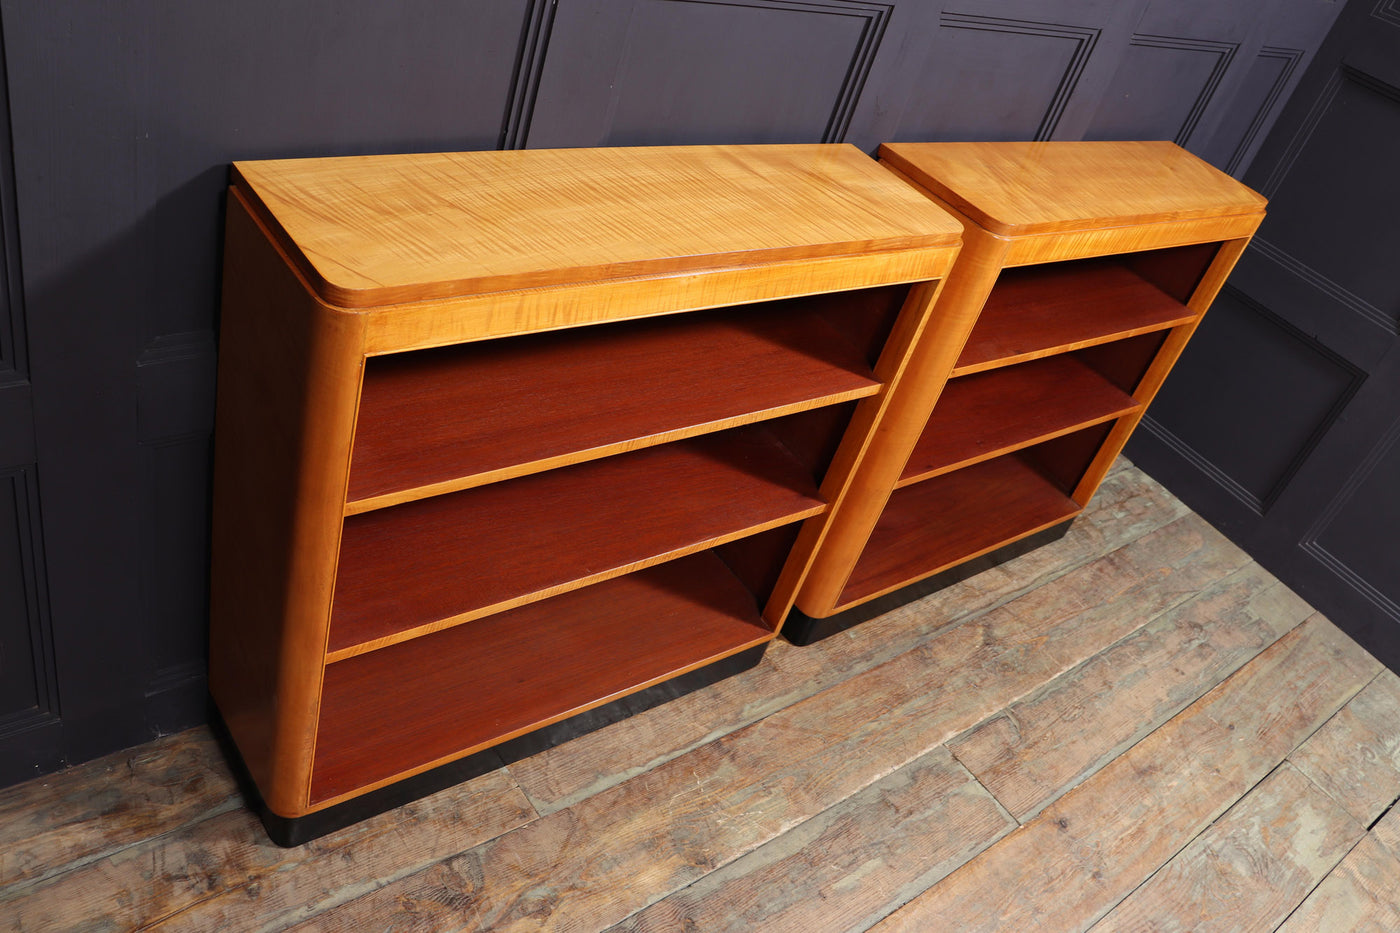 Pair of English Art Deco Sycamore Bookcases